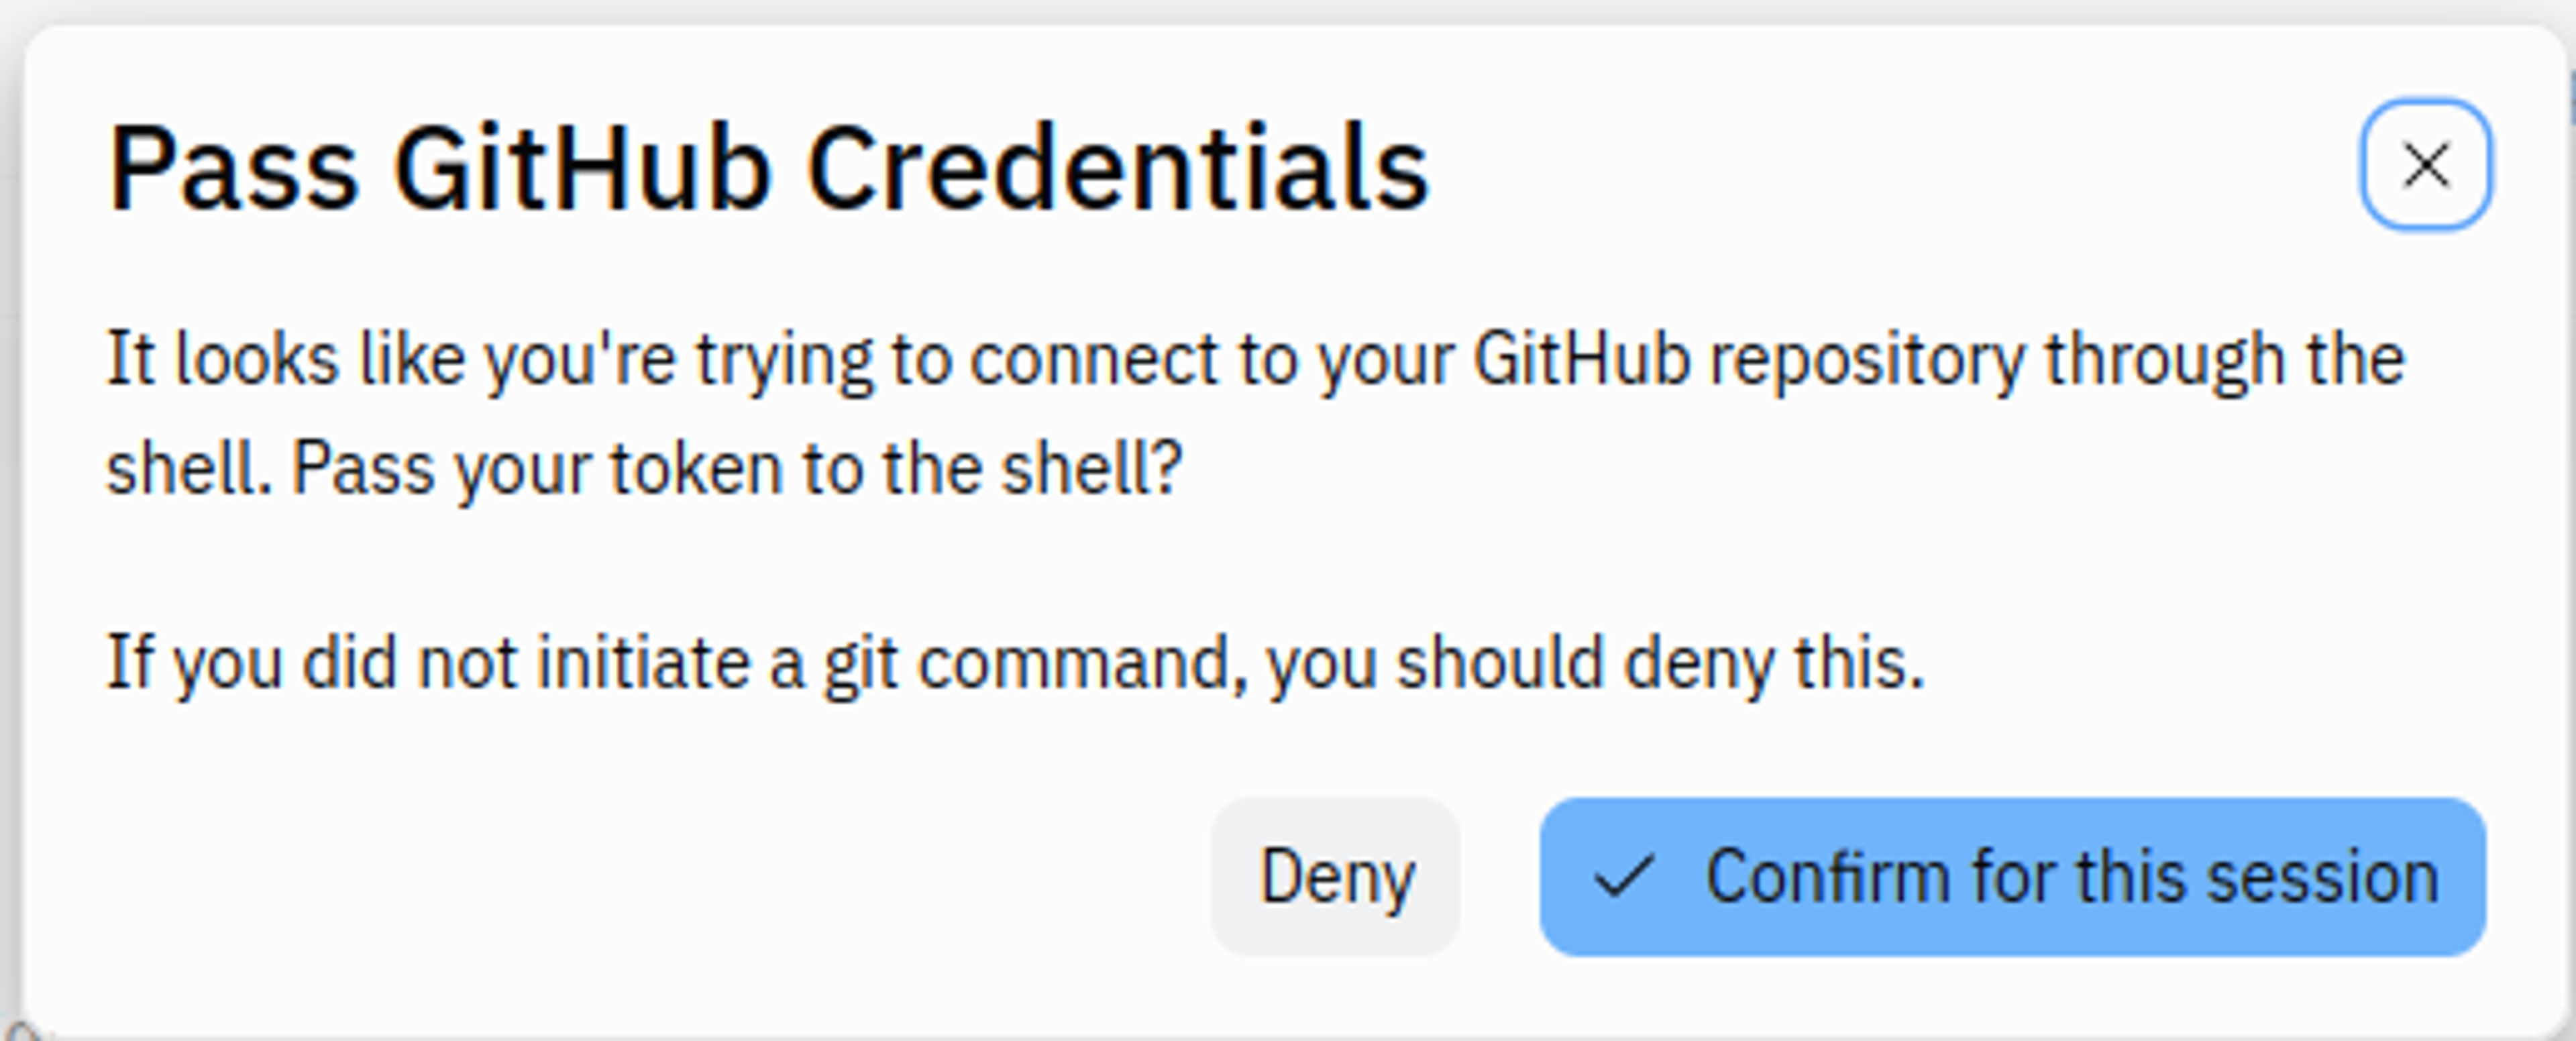 dialog asking to pass GitHub credentials to the shell